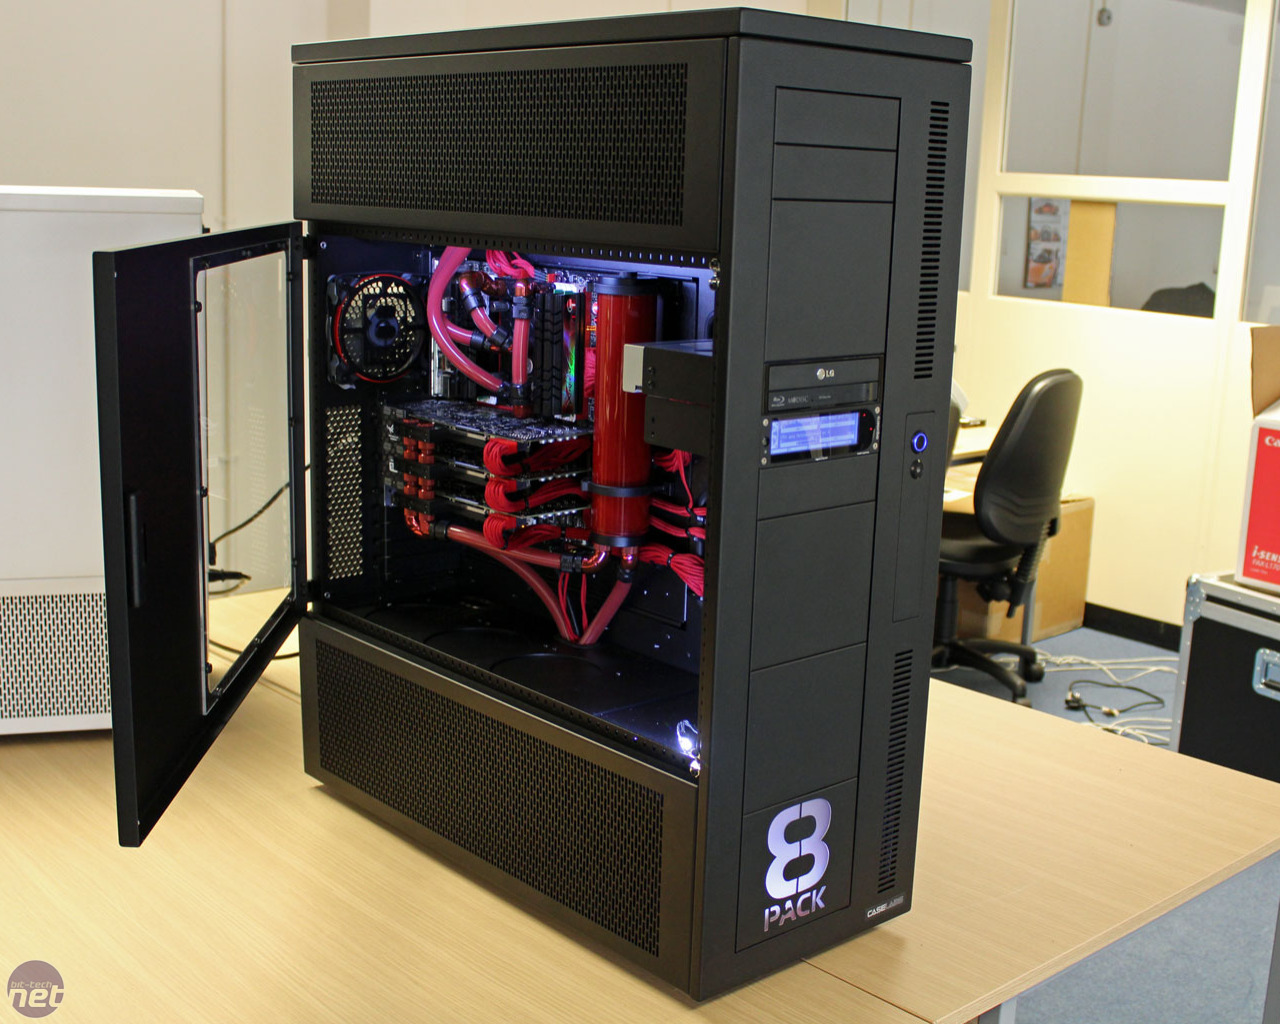 Overclockers UK 8Pack Systems Preview and Interview | bit-tech.net
